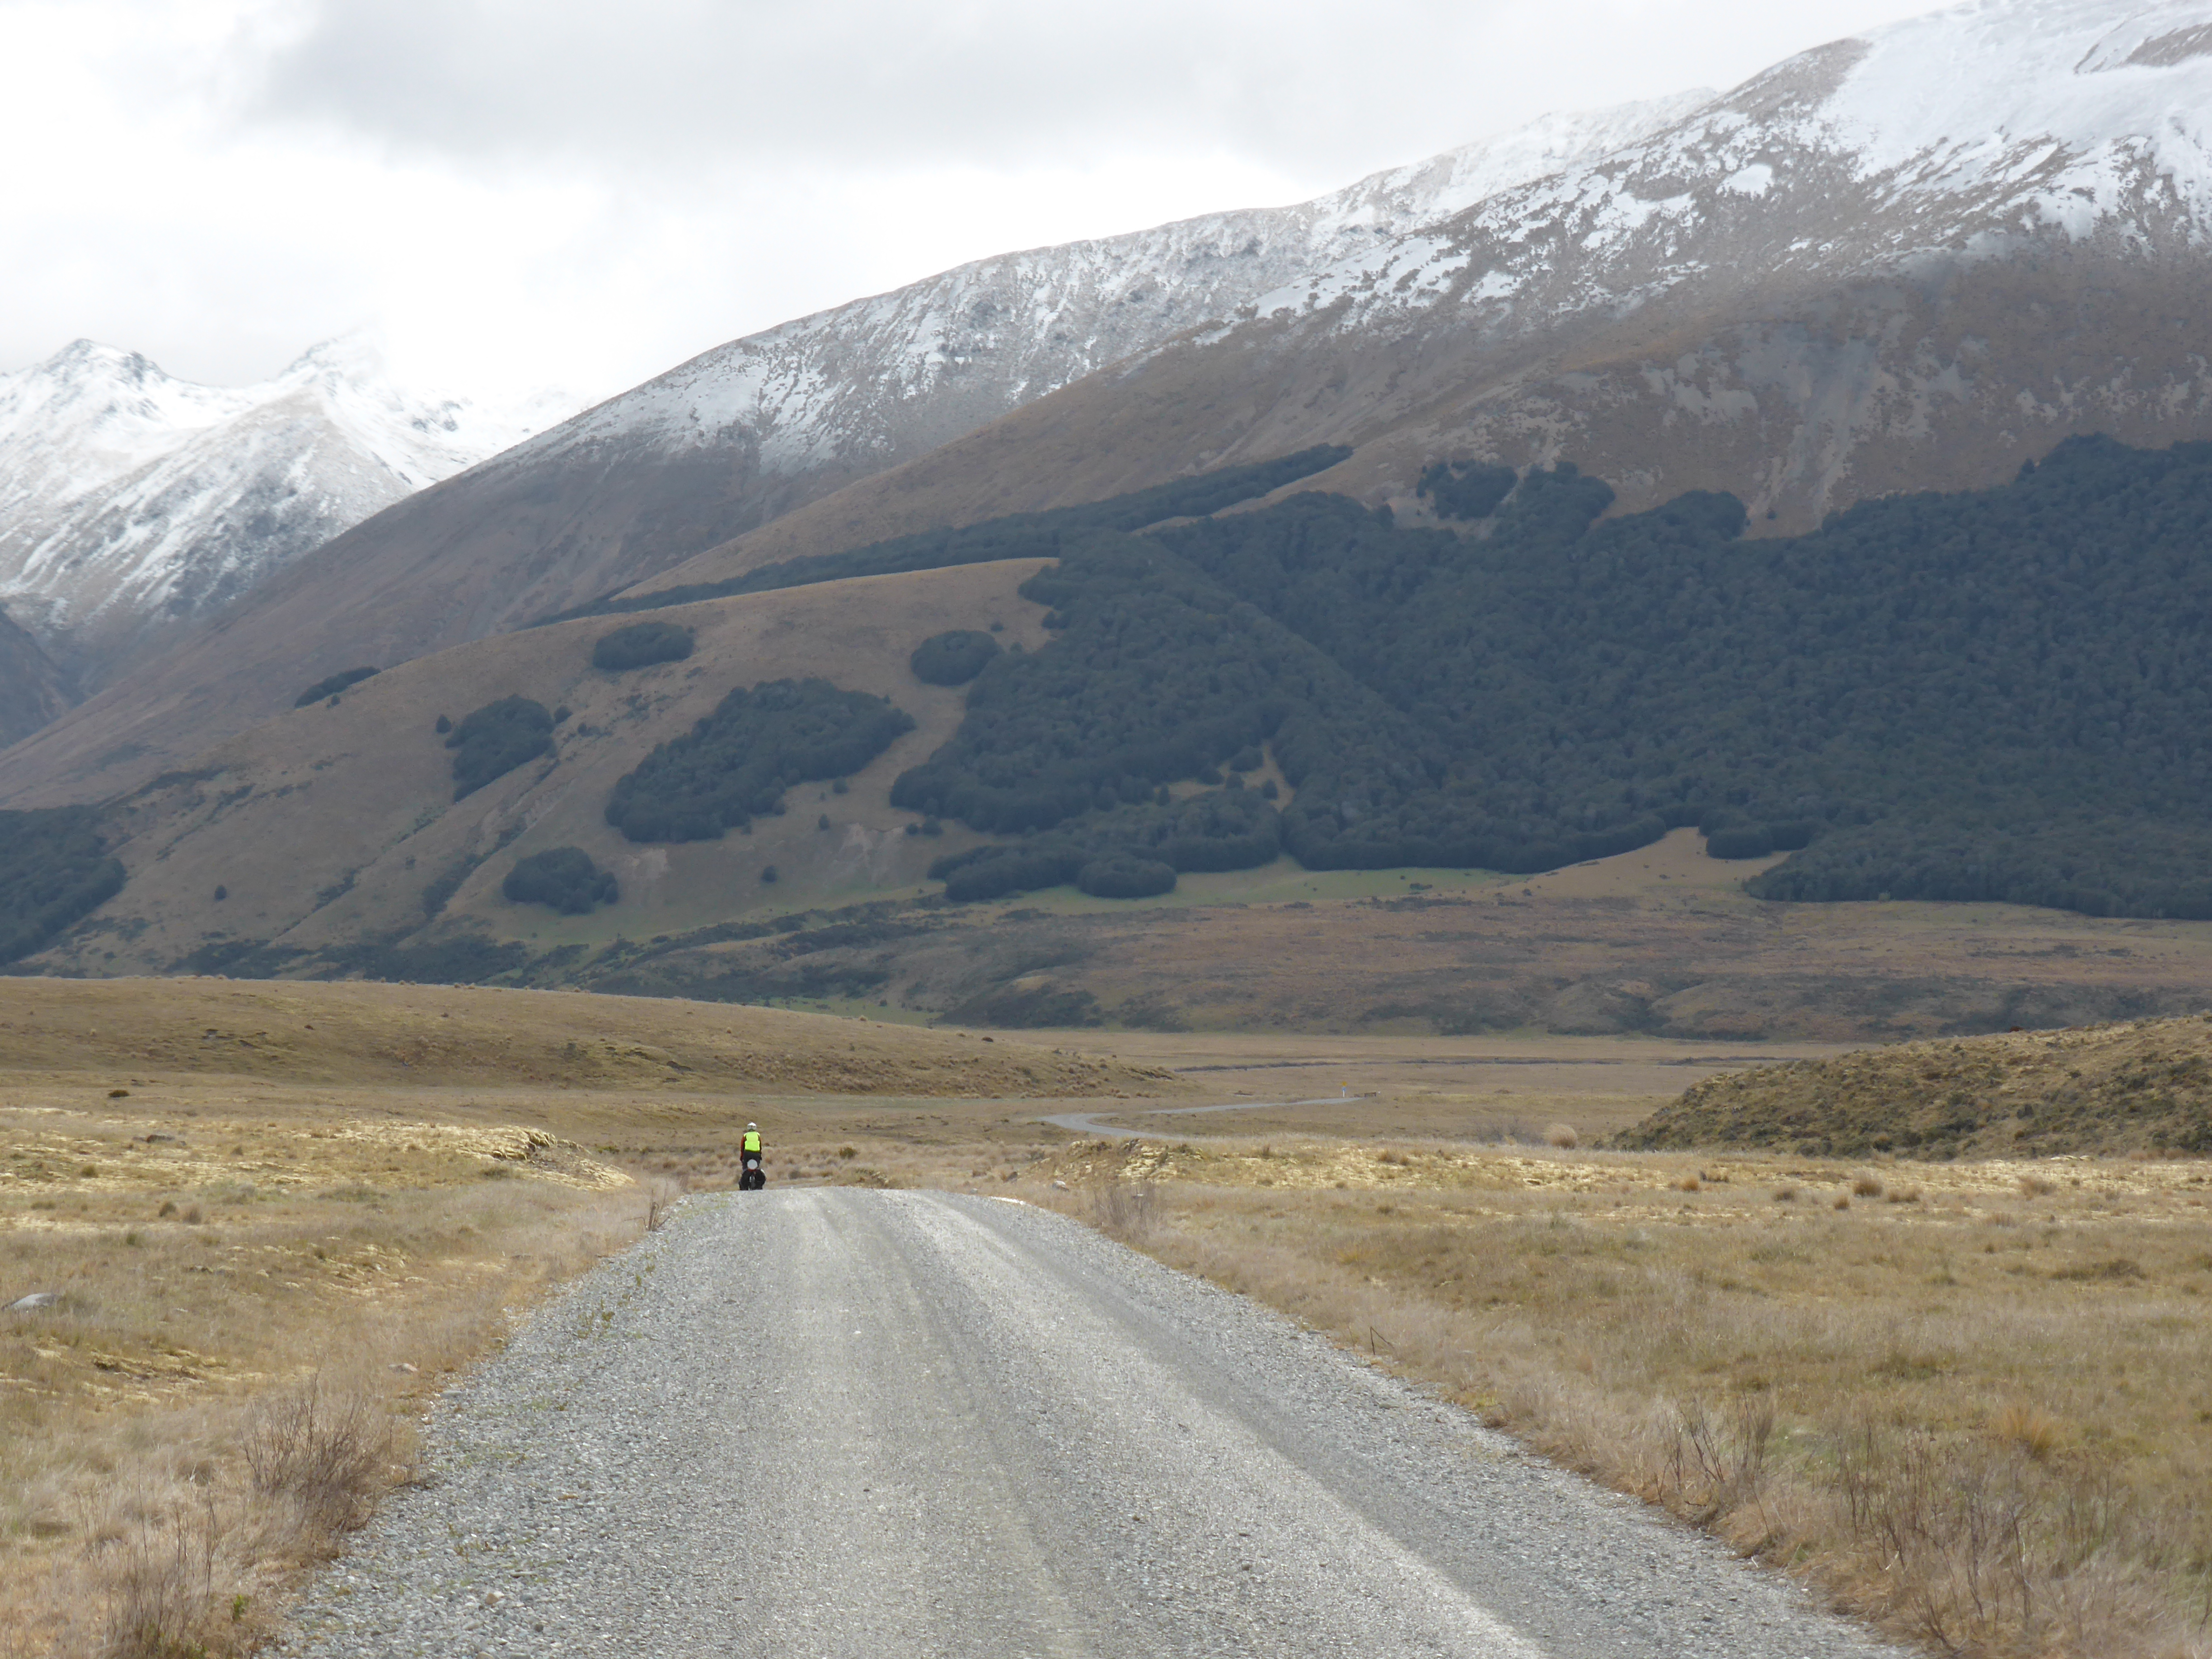 A cyclist rides a gravel road with snow capped mountains surrounding